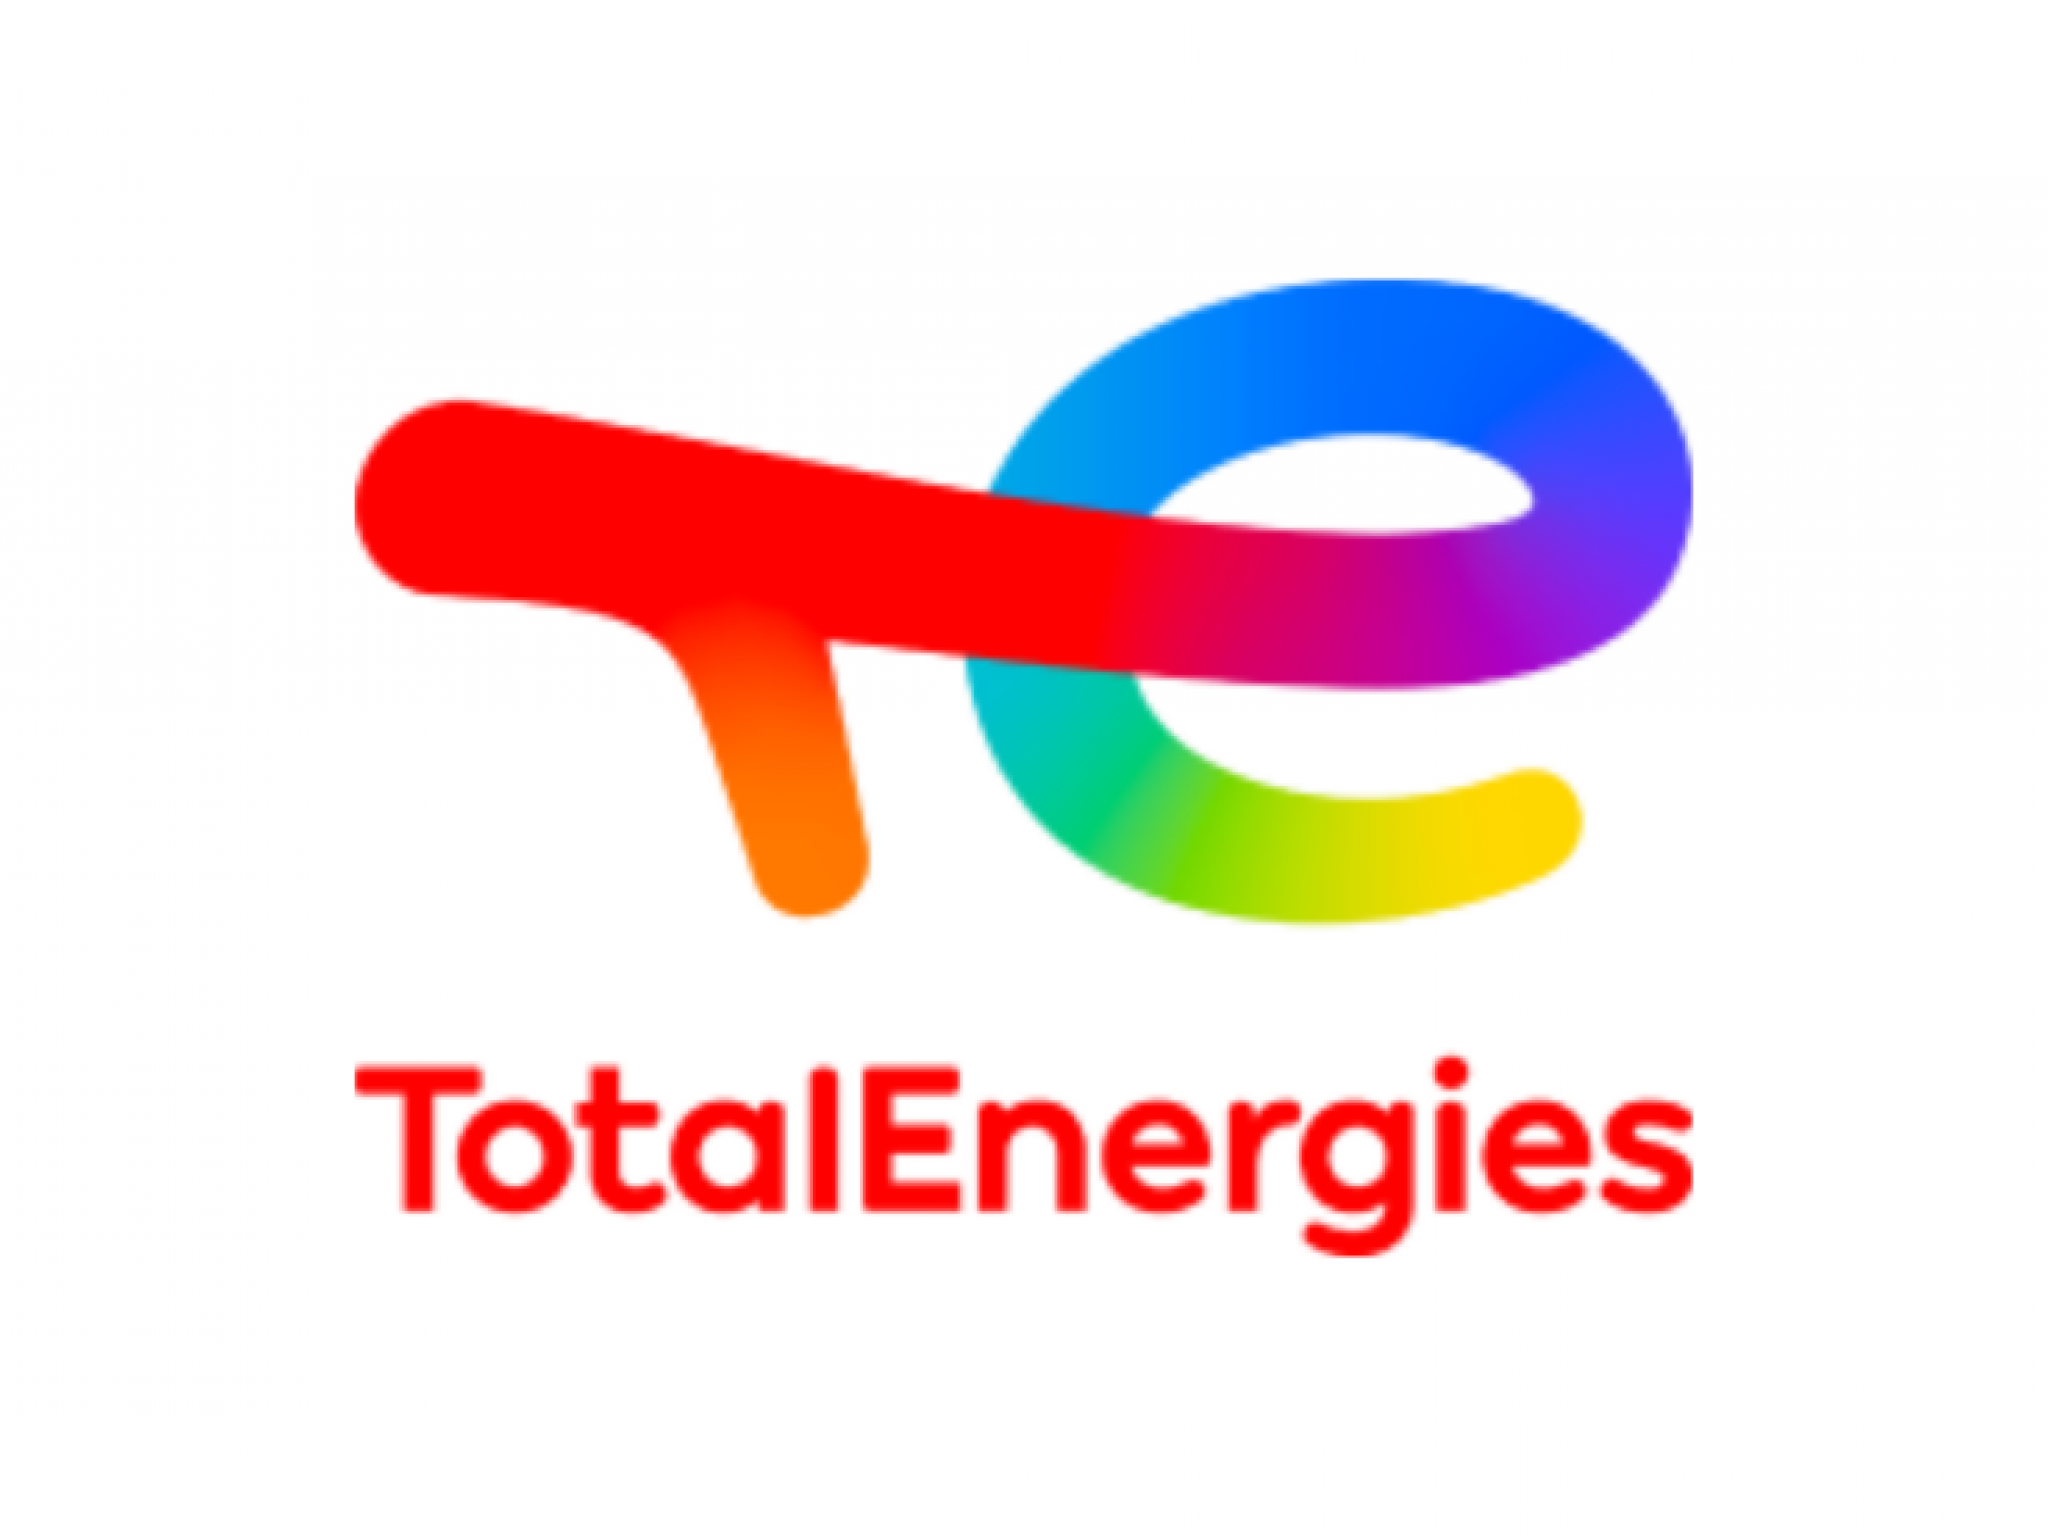  totalenergies-stock-gains-traction-on-finnish-used-oil-reprocessing-acquisition-details 